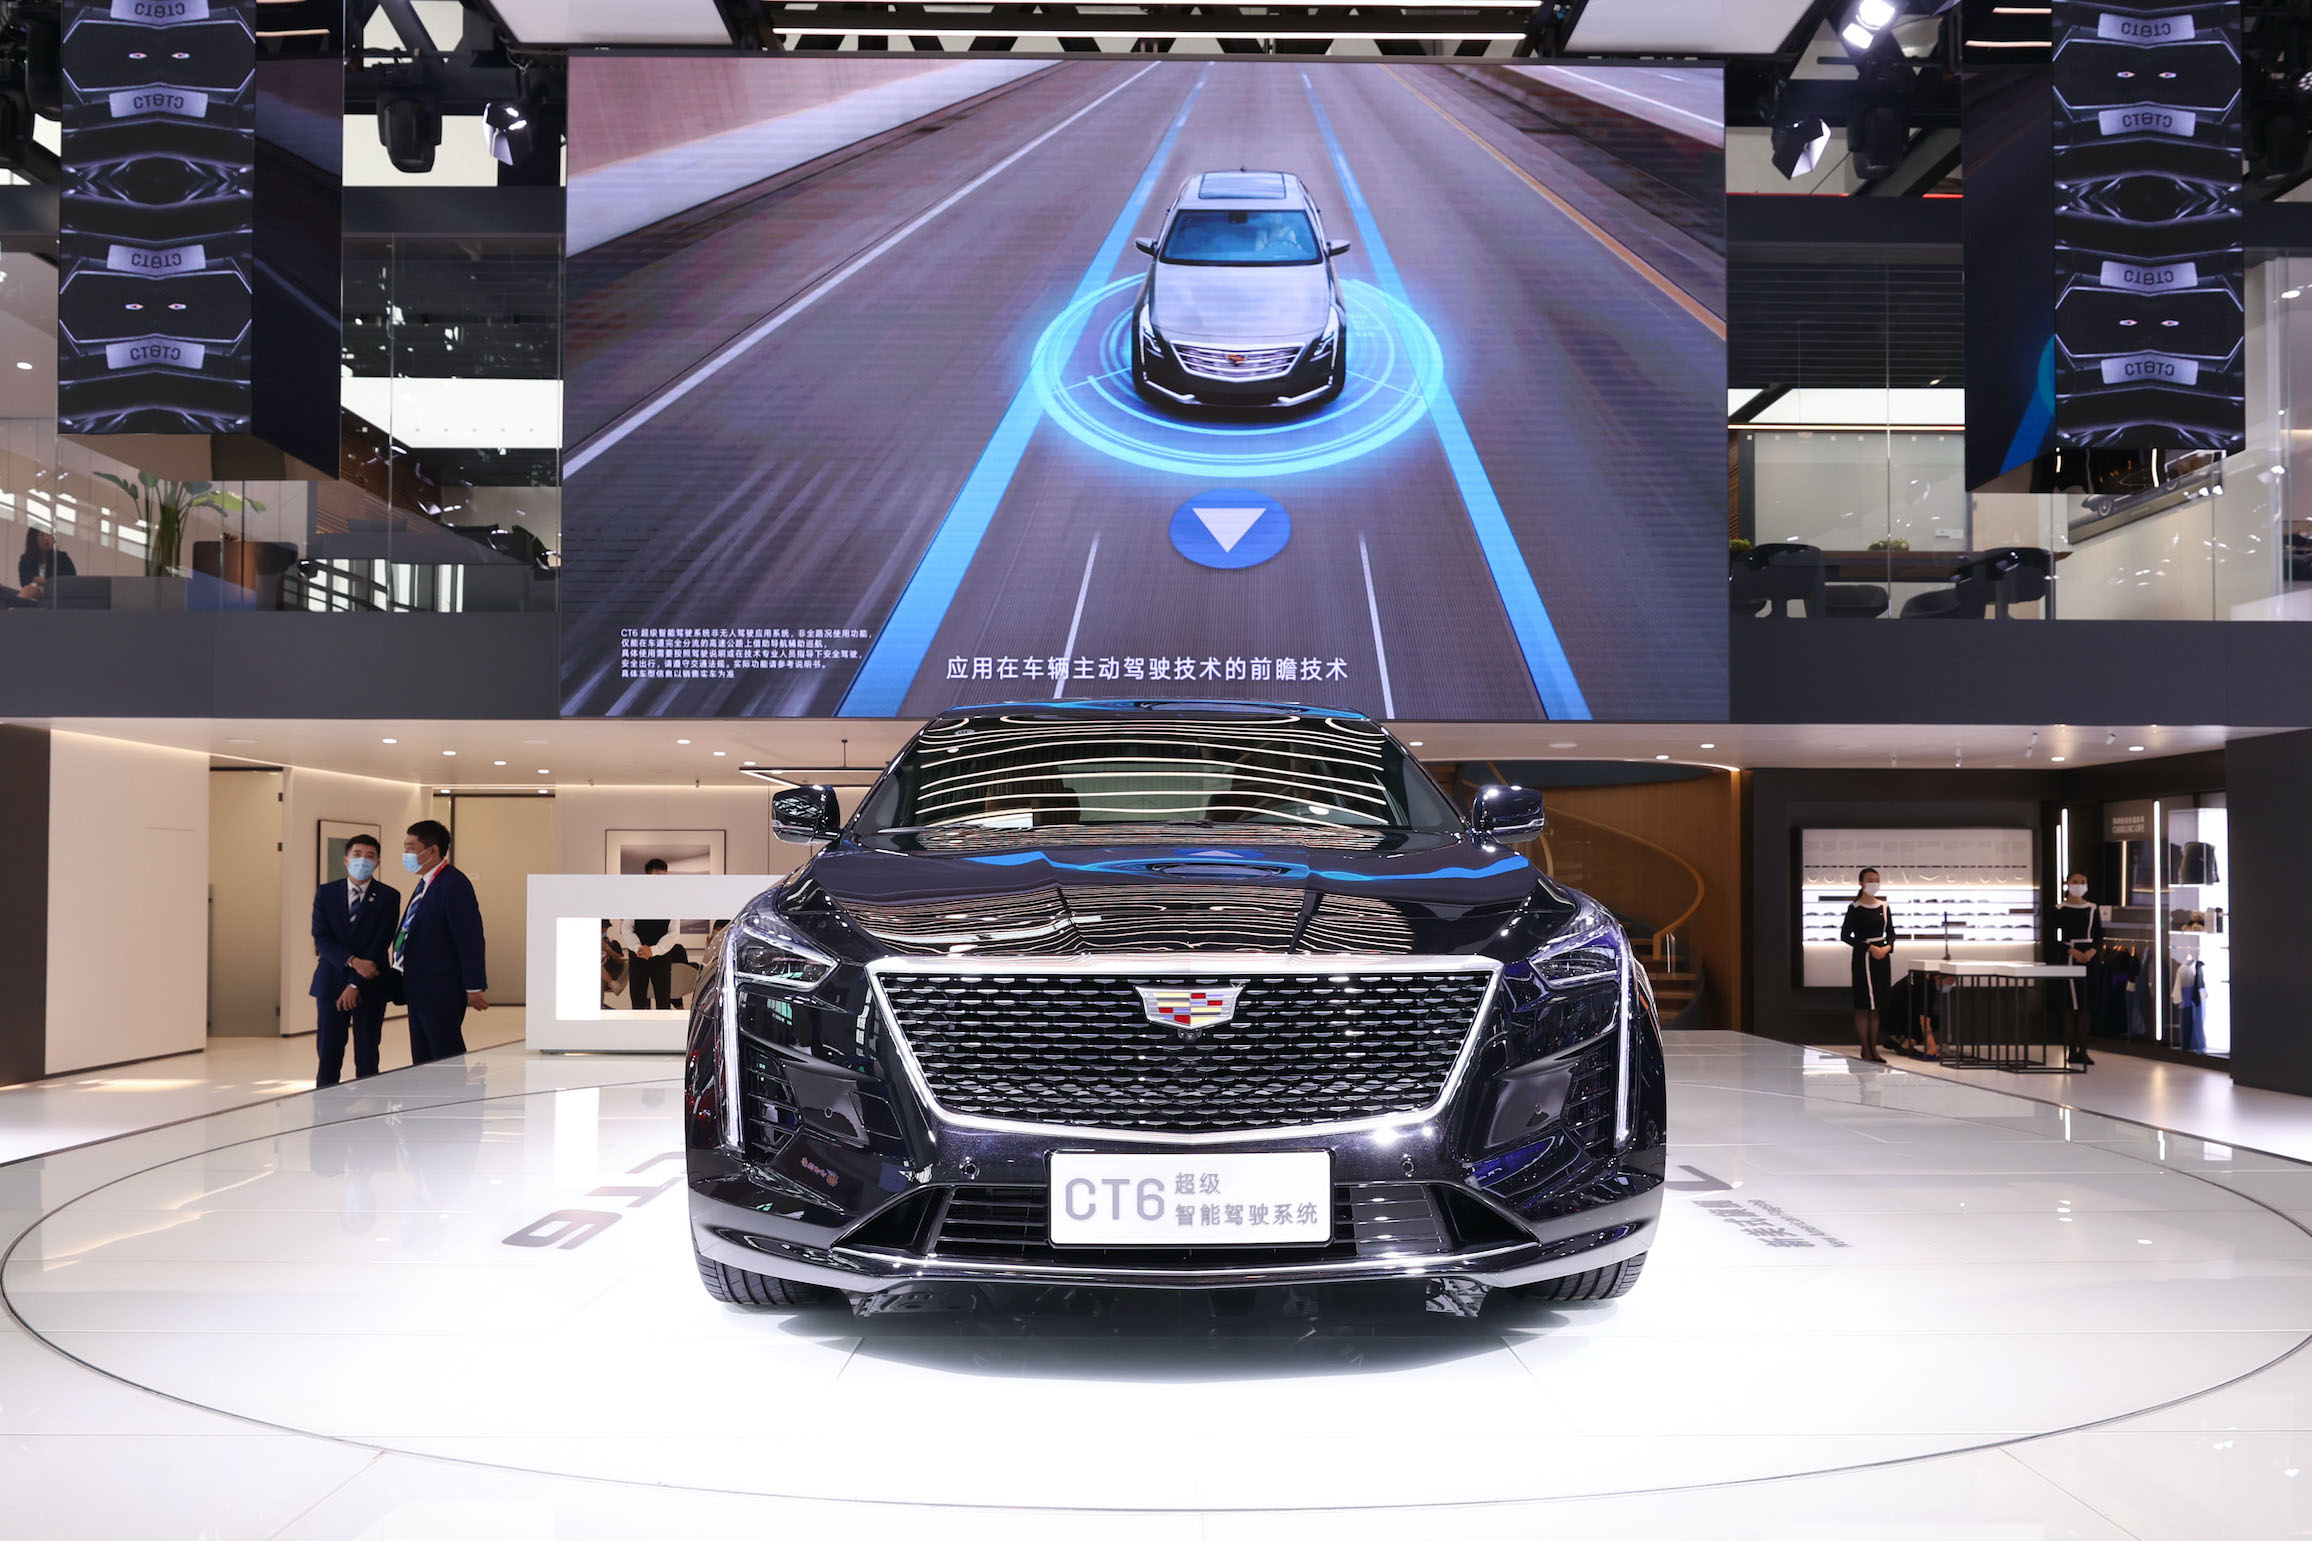 A Cadillac CT6 car is on display during 2020 Beijing International Automotive Exhibition